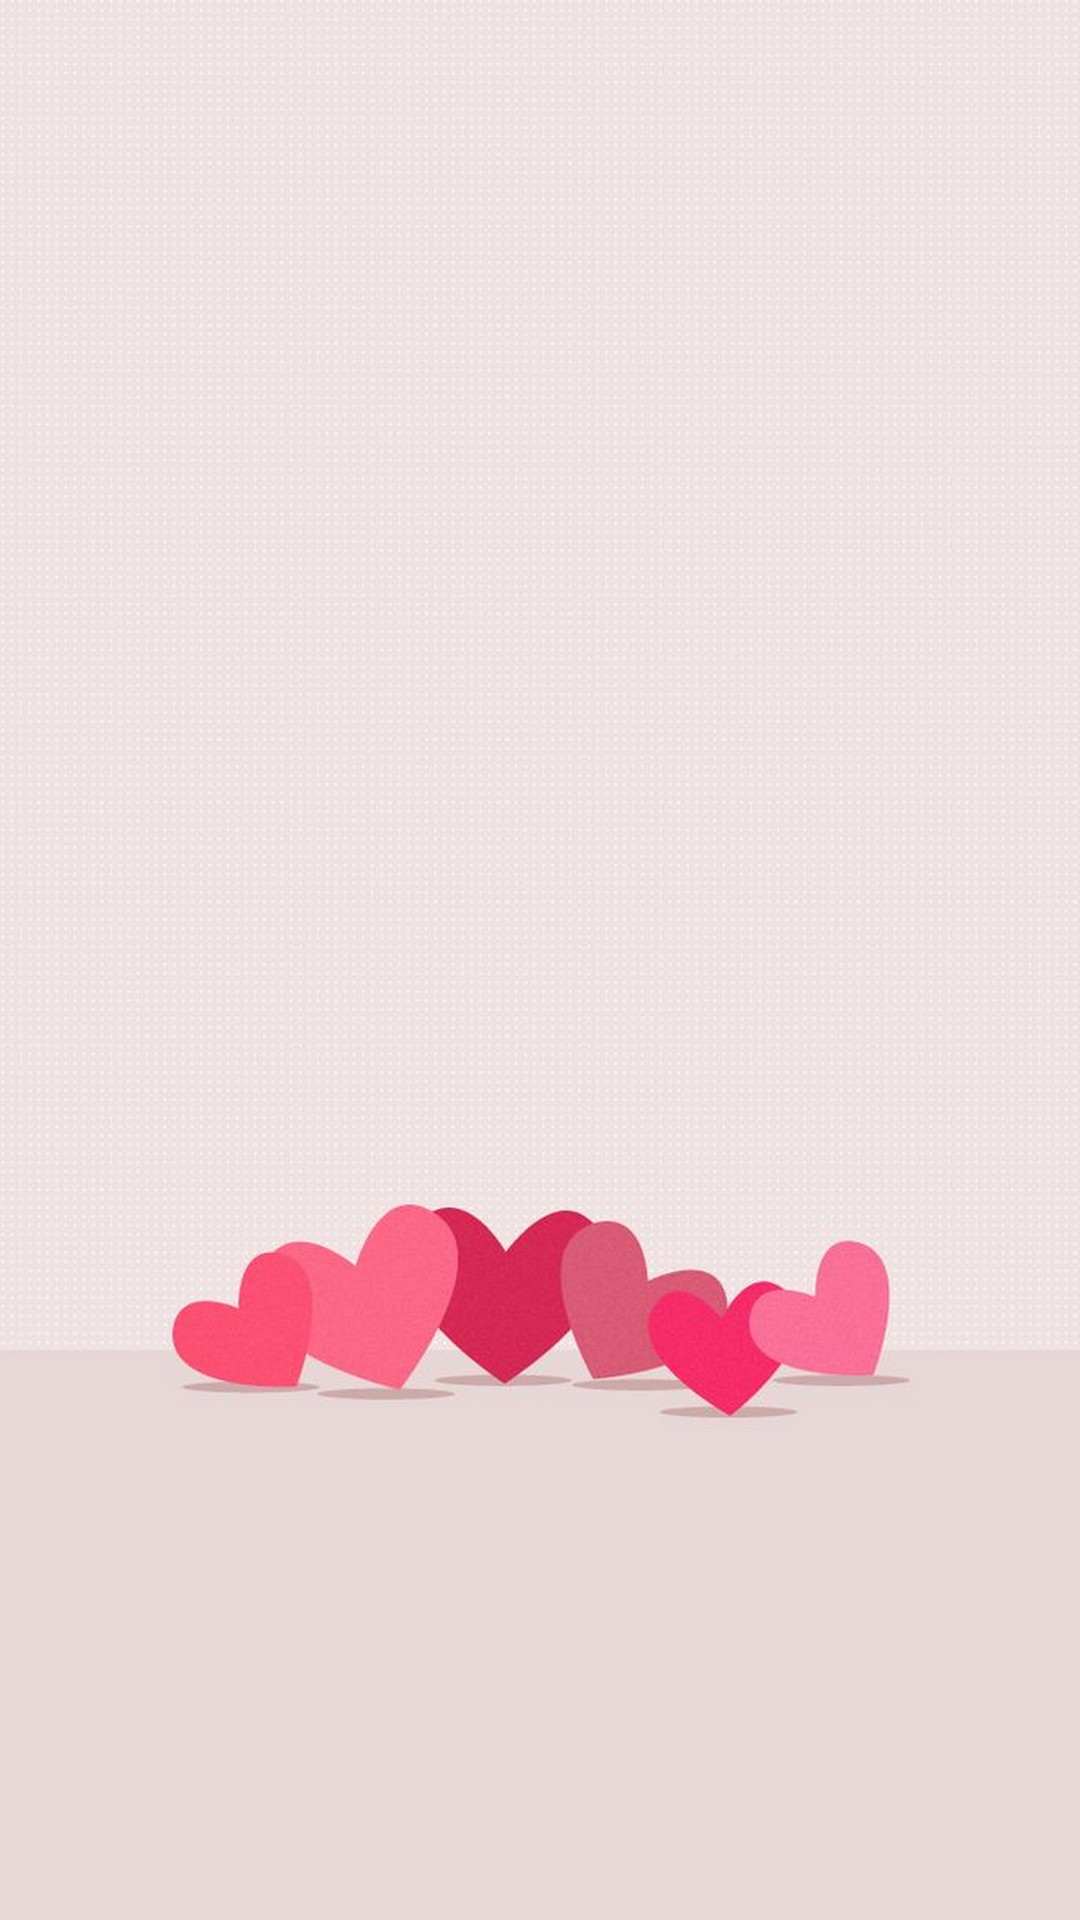 Valentines Day Pictures For Android with HD resolution 1080x1920